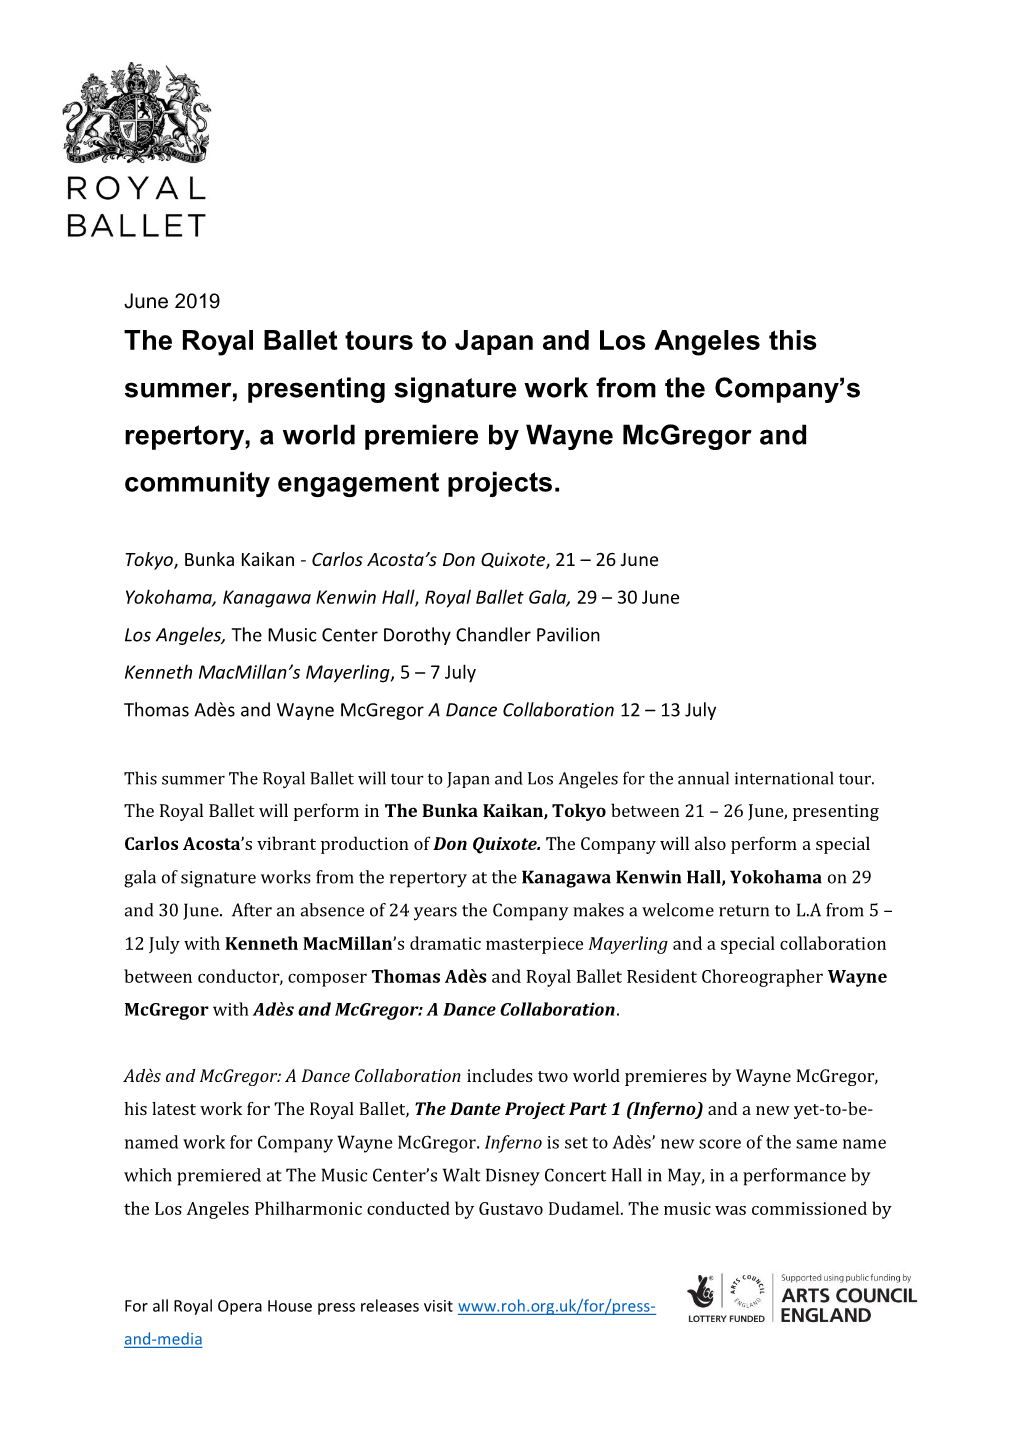 The Royal Ballet Tours to Japan and Los Angeles This Summer